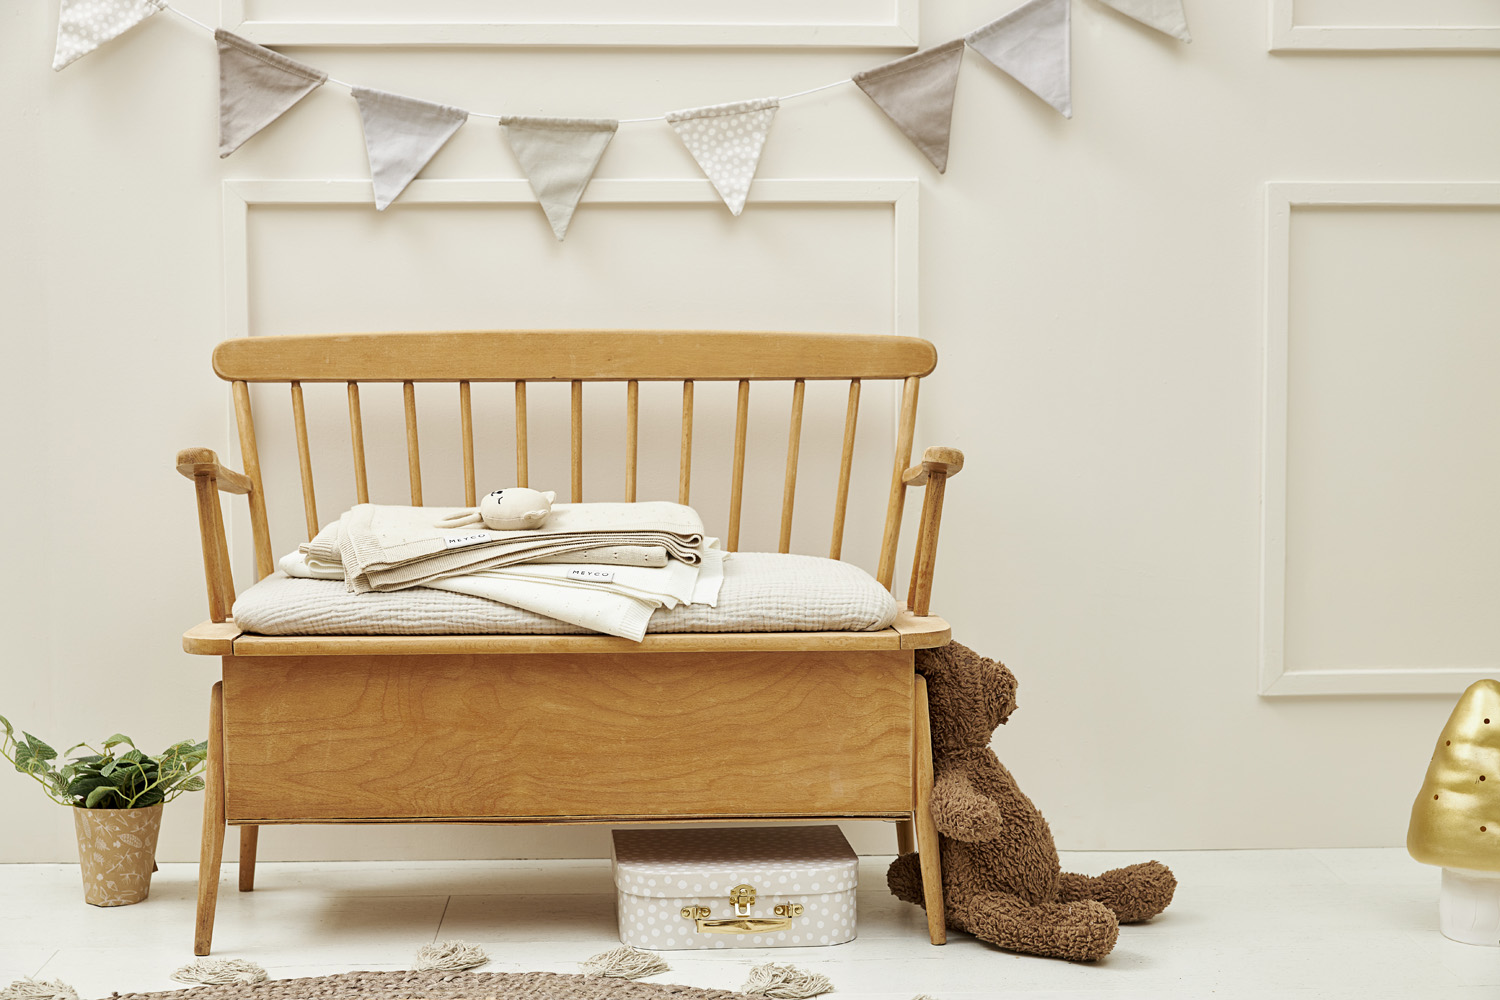 Cot bed blanket bamboo Ajour - offwhite - 100x150cm